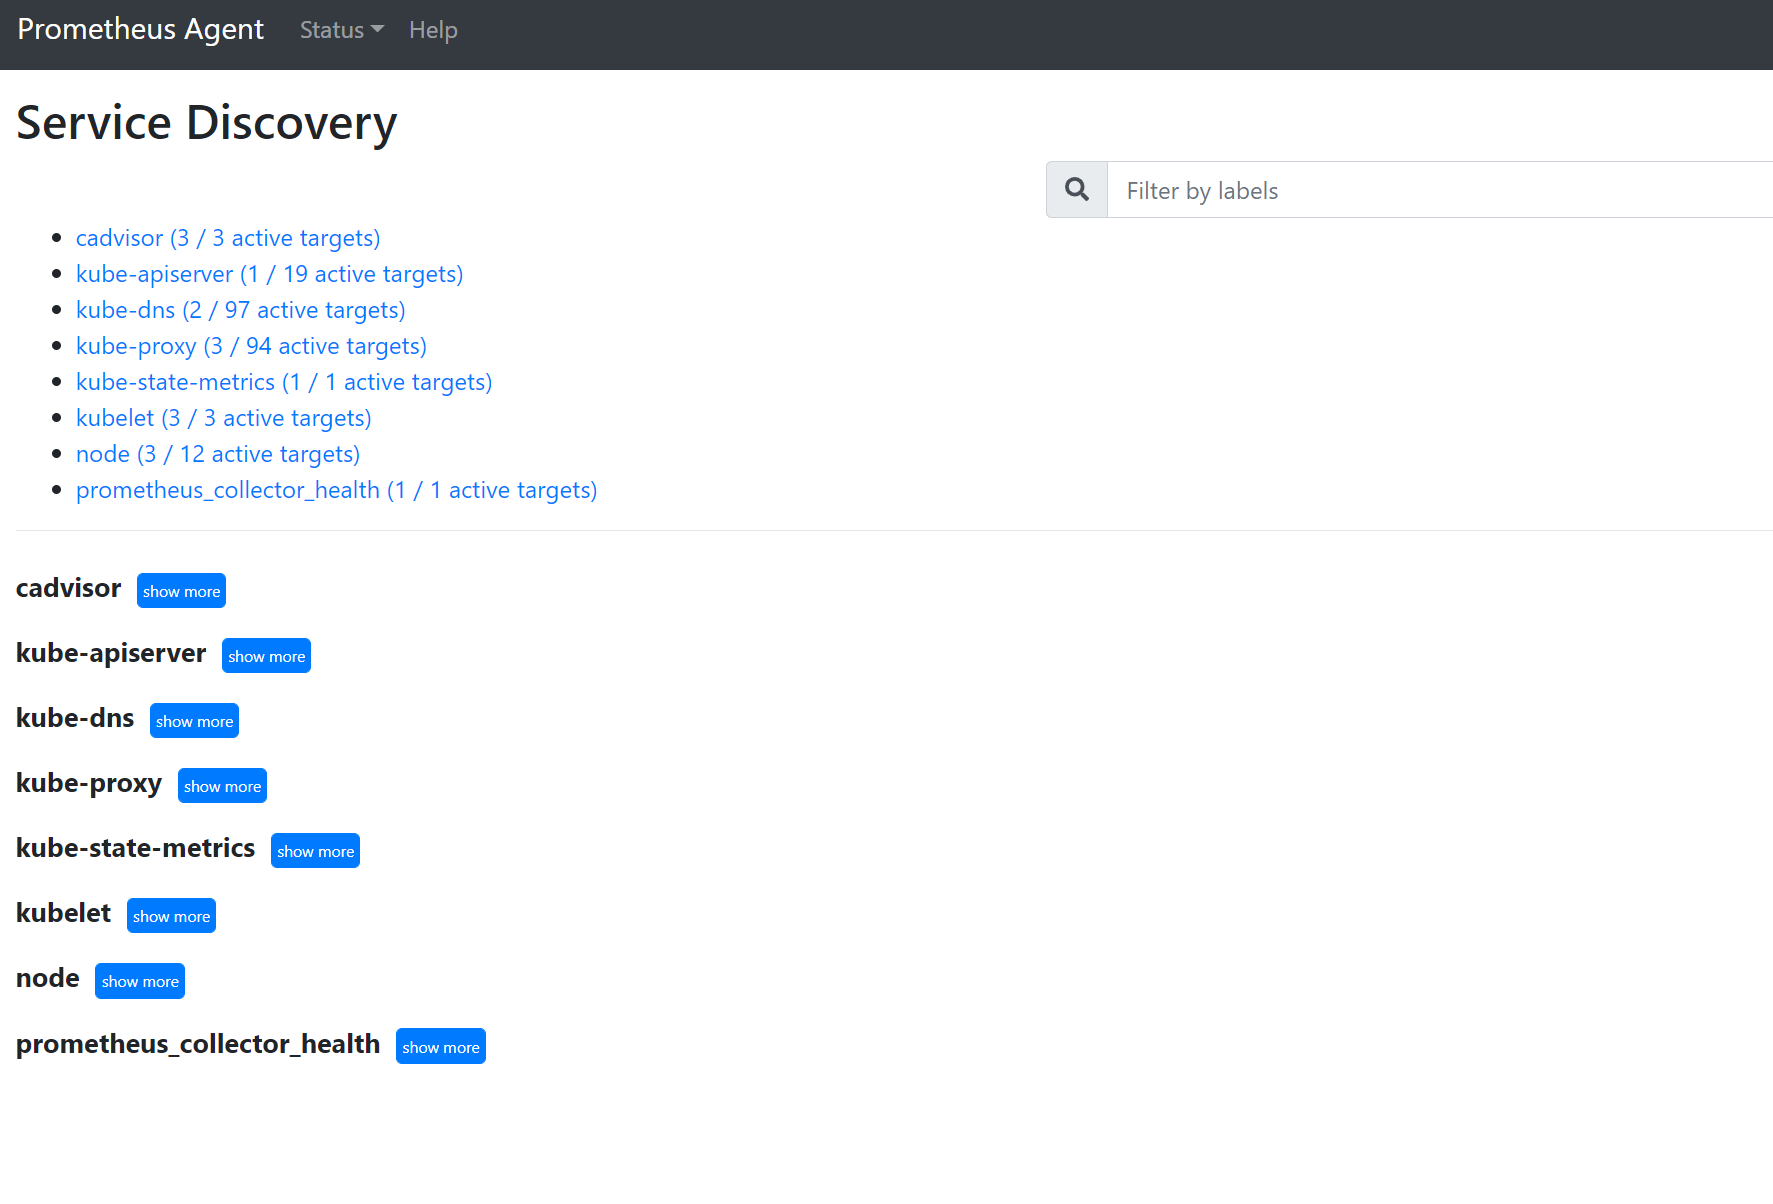 Screenshot showing service discovery.